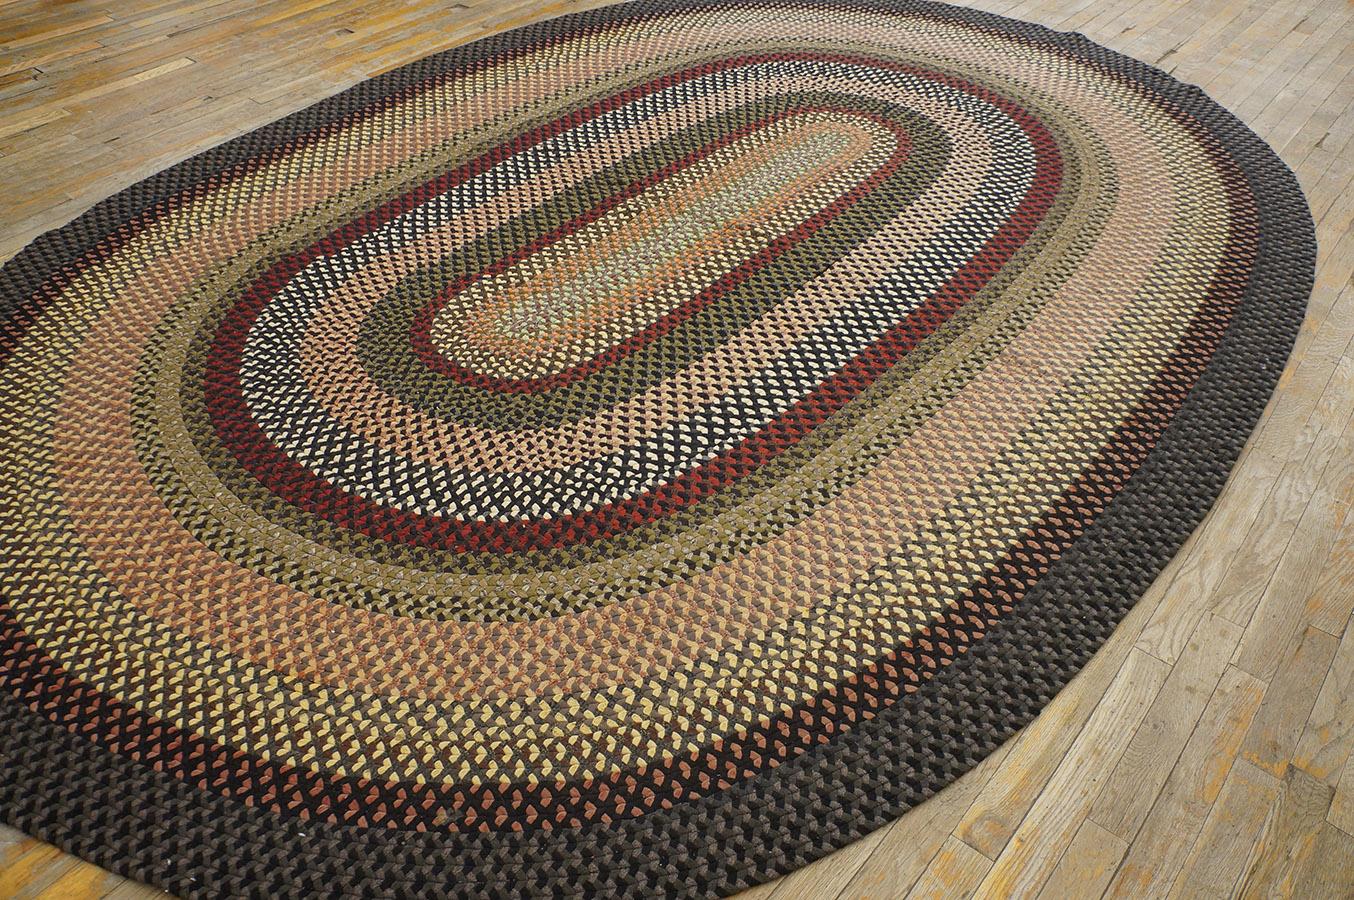 Country 1930s American Braided Rug ( 7'6